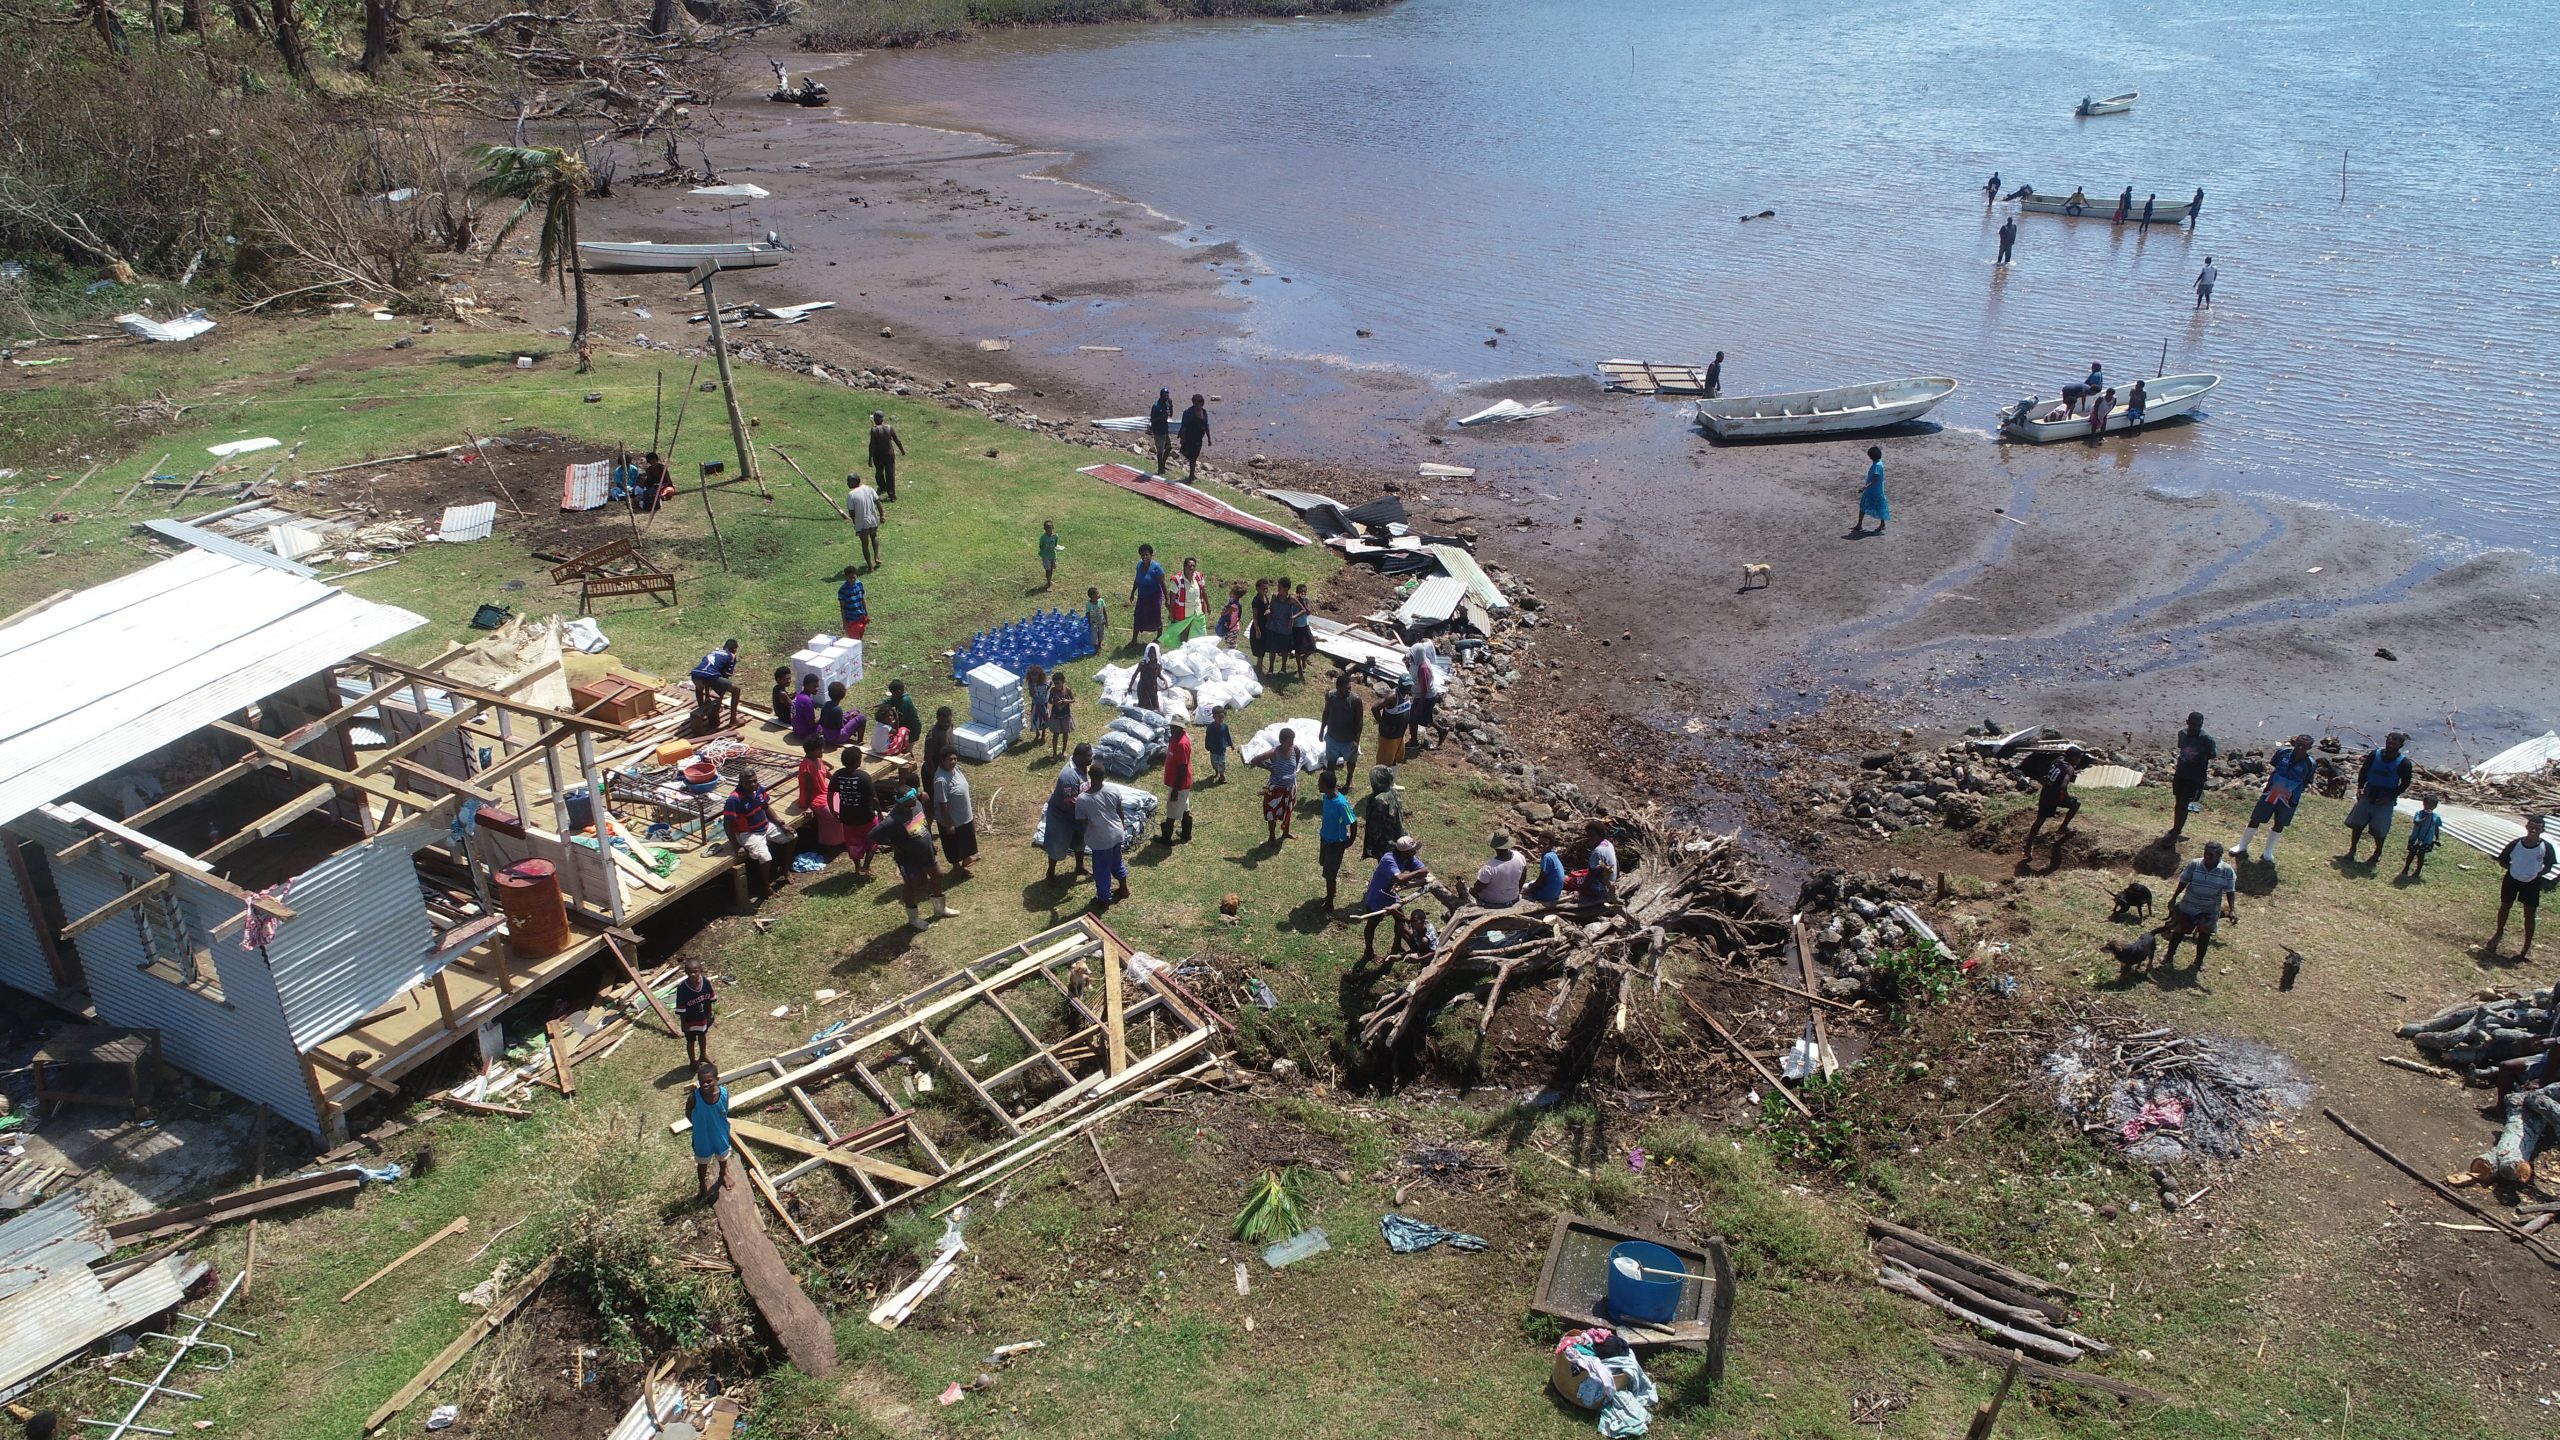 YachtAid Global Launches ‘Operation Viti’ Relief for Fiji